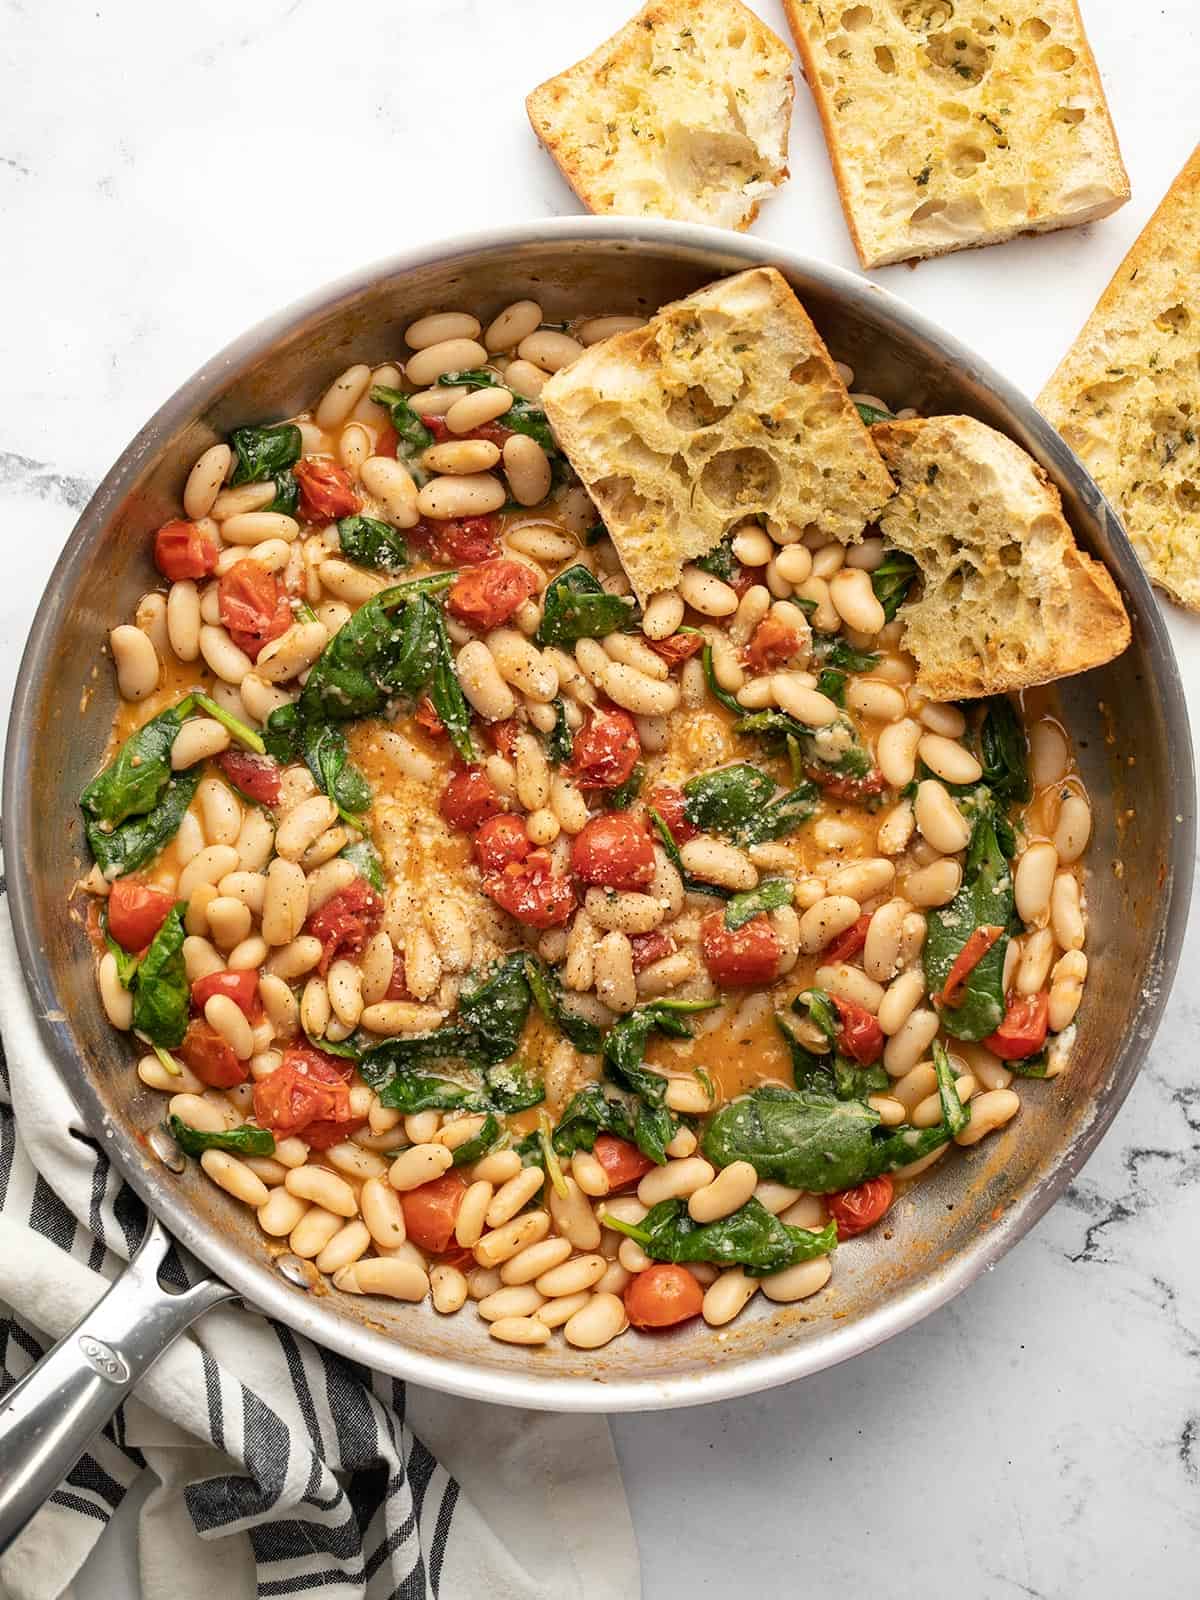 Overhead view of a skillet full of saucy white beans with garlic bread on the side.